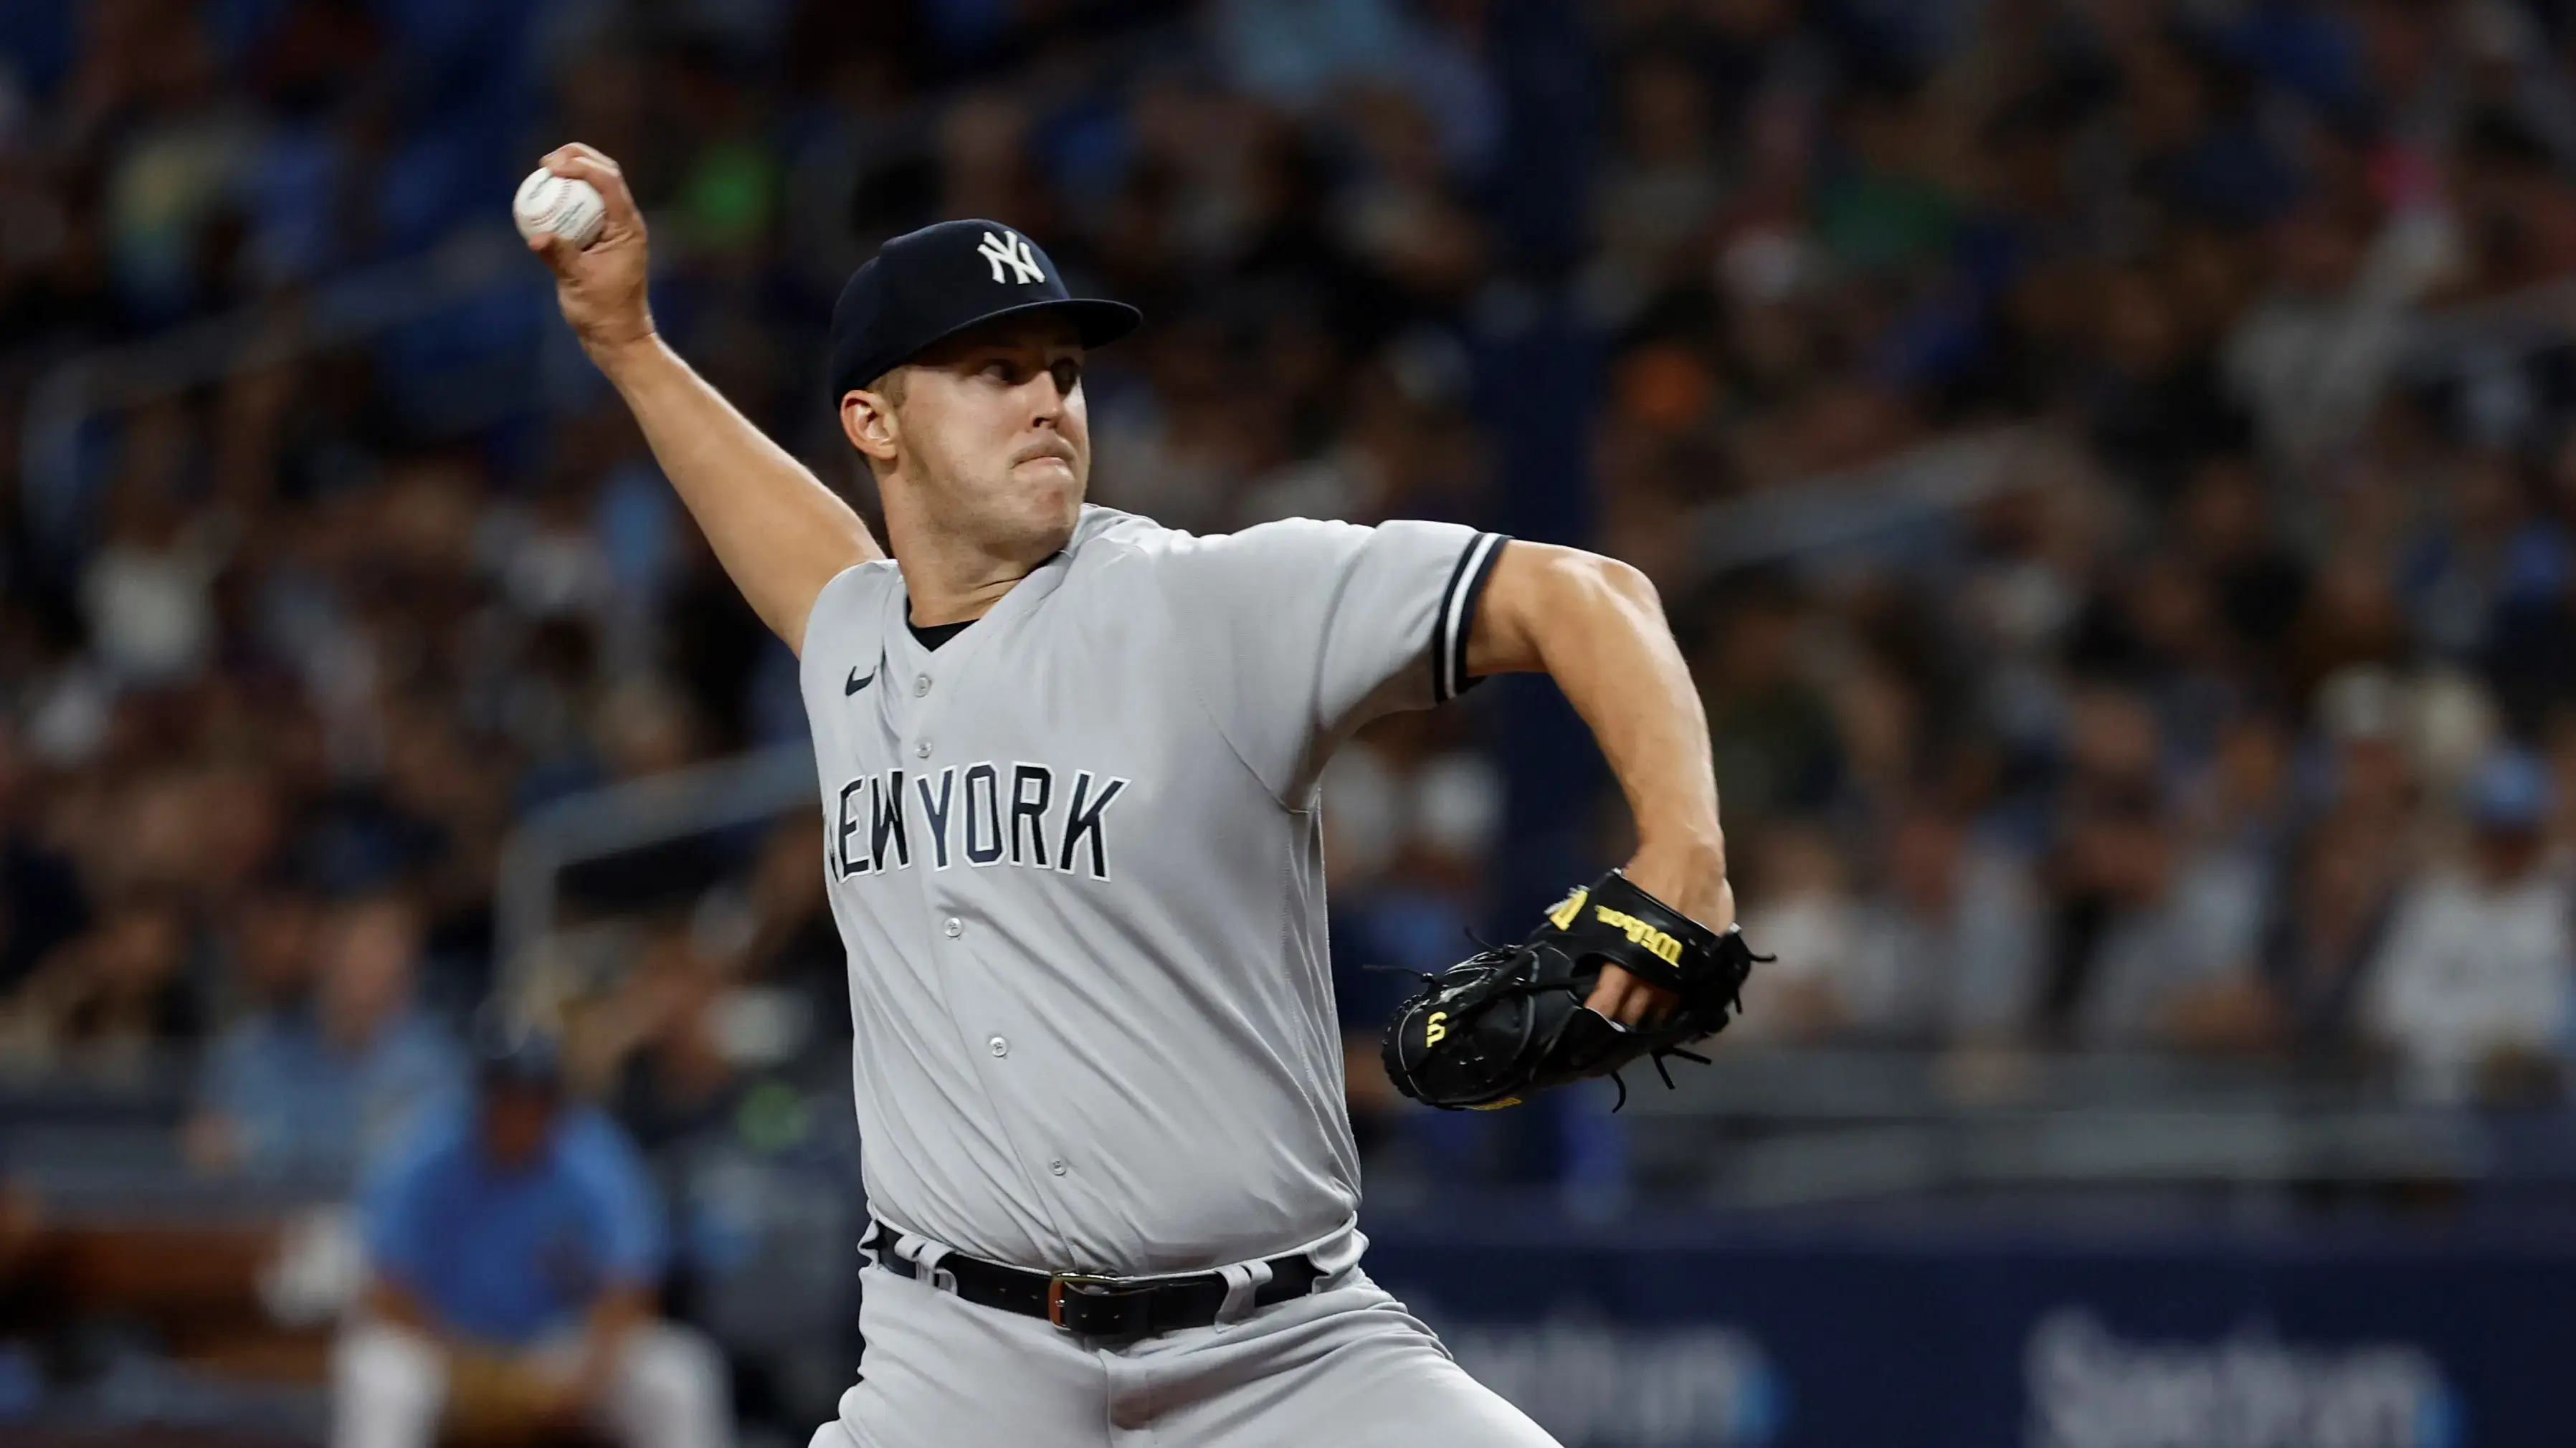 May 27, 2022; St. Petersburg, Florida, USA; New York Yankees starting pitcher Jameson Taillon (50) throws a pitch during the third inning against the Tampa Bay Rays at Tropicana Field. Mandatory Credit: Kim Klement-USA TODAY Sports / Kim Klement-USA TODAY Sports